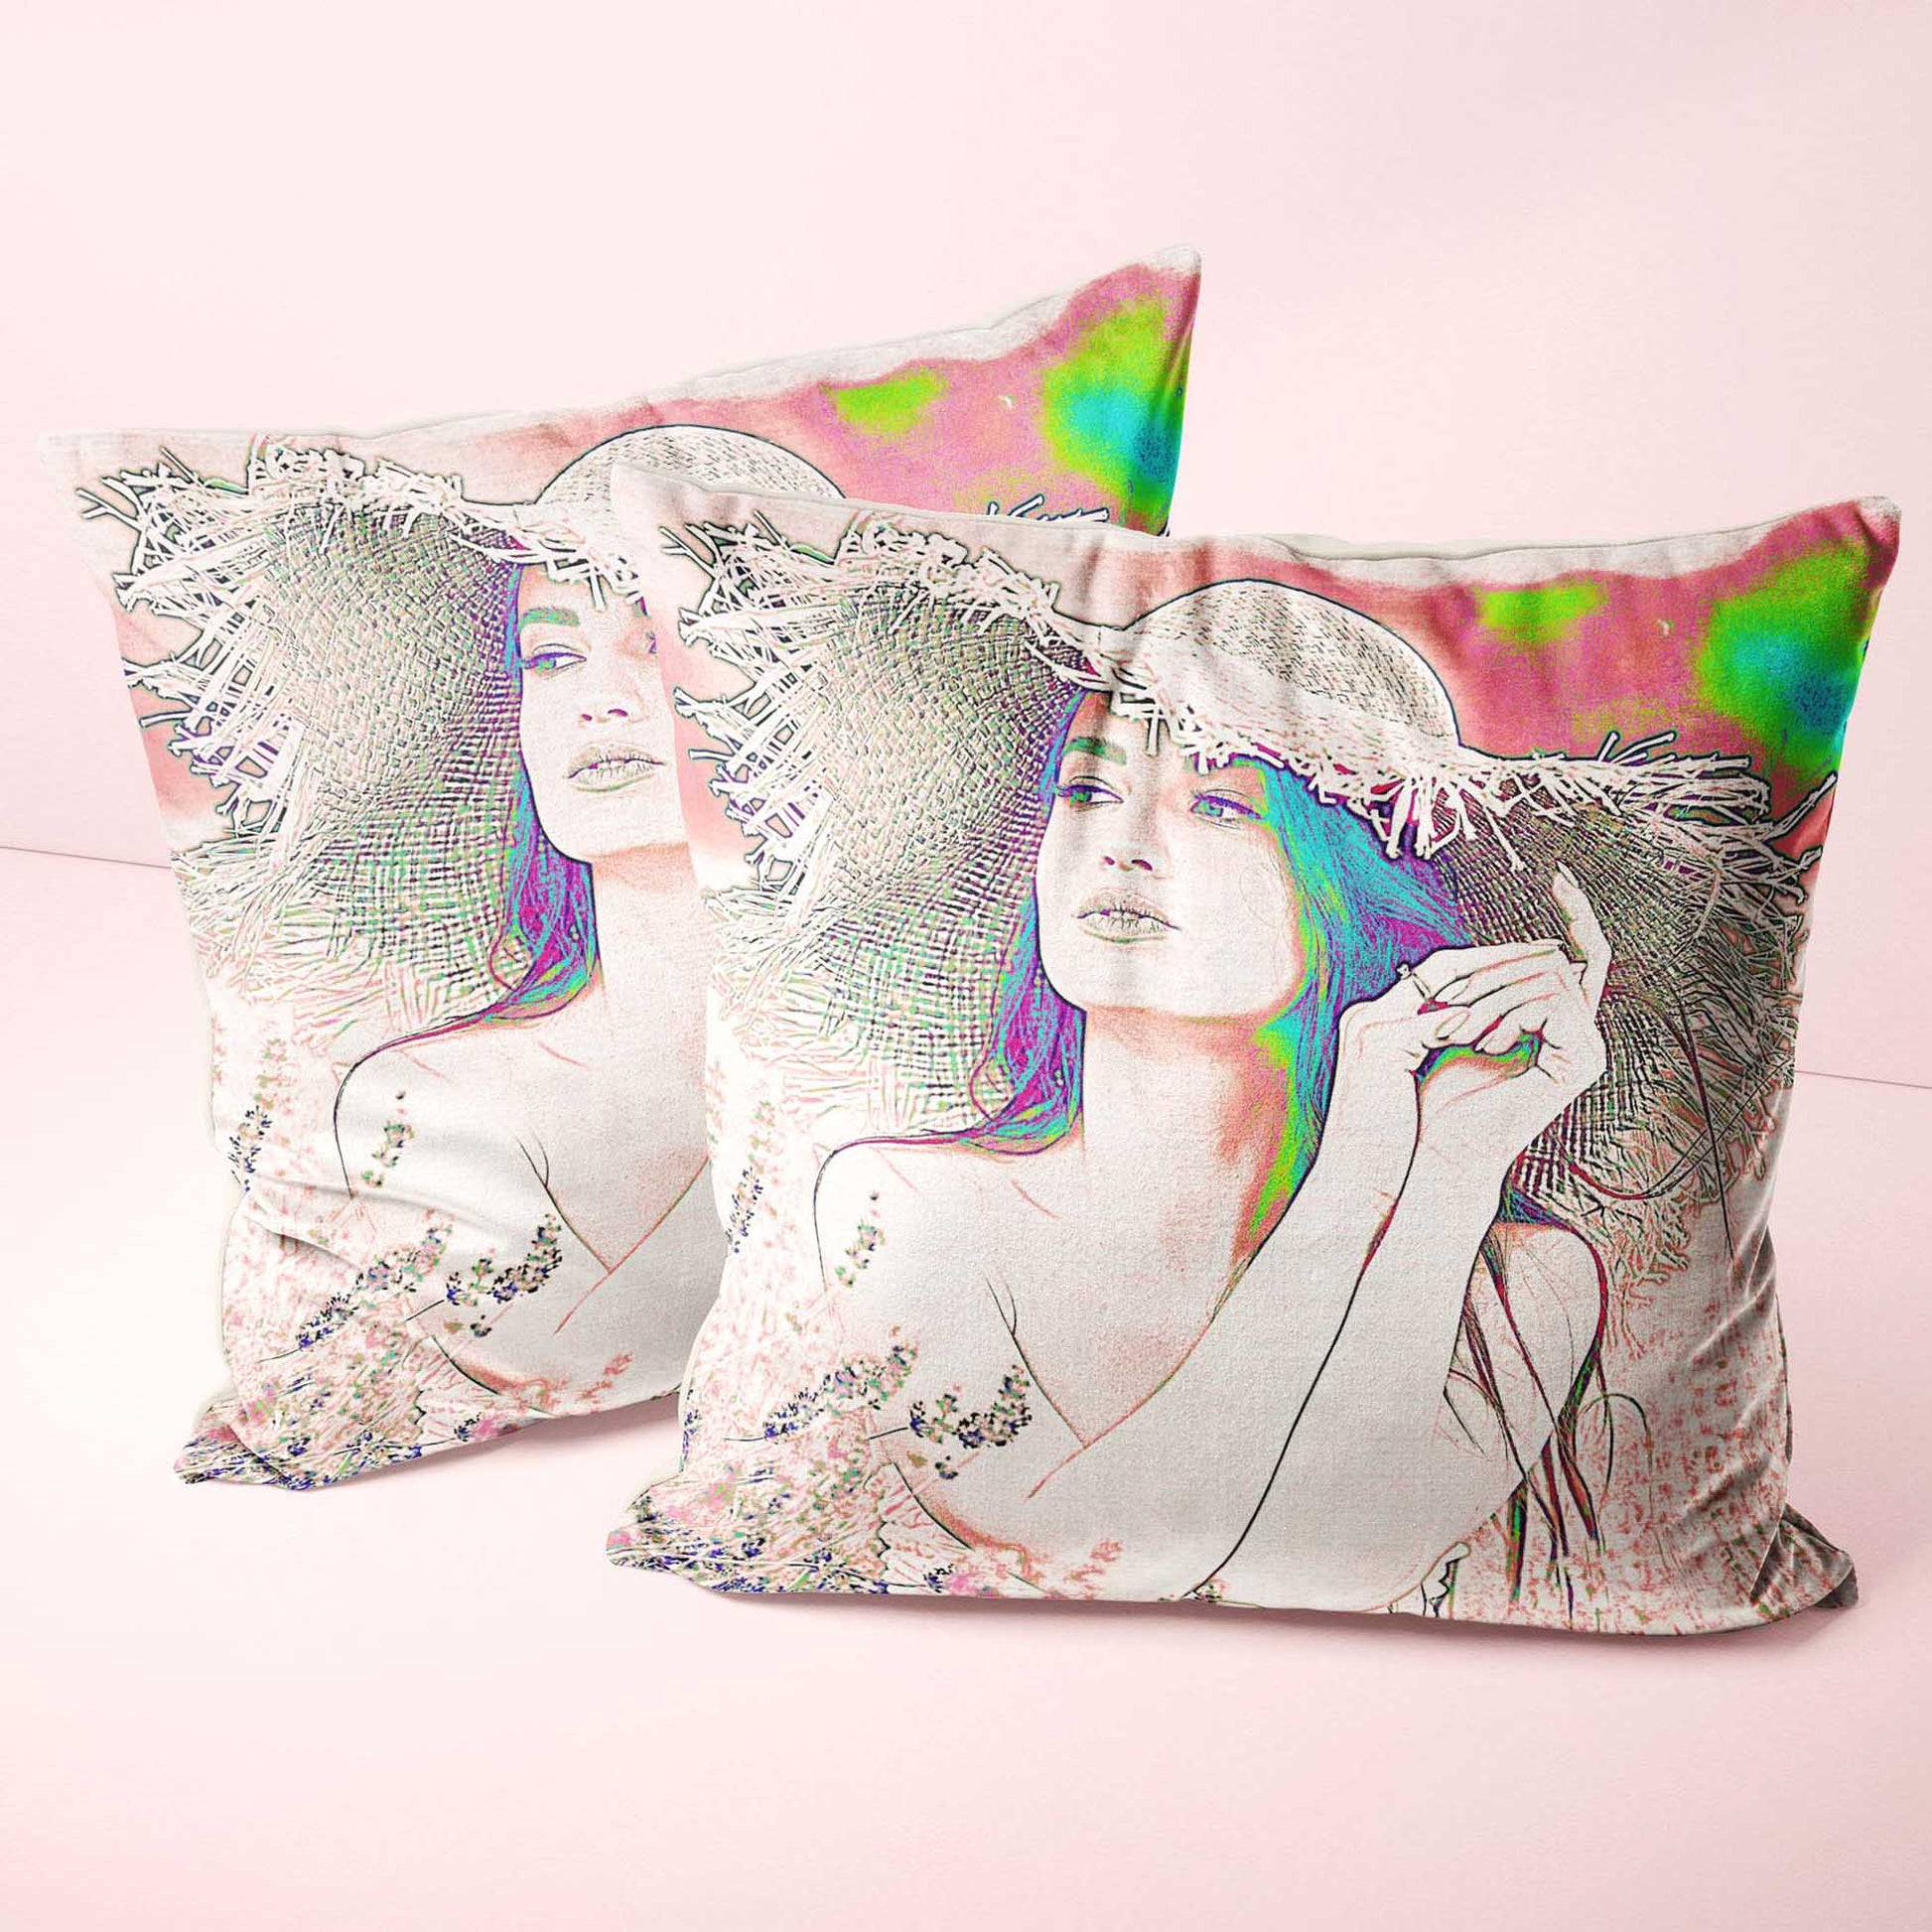 Immerse yourself in the world of creativity with the Personalised Pencil Drawing Cushion. Its soft and velvety texture invites you to snuggle up and relax. Printed from your photo, this handmade cushion becomes a unique piece of artwork